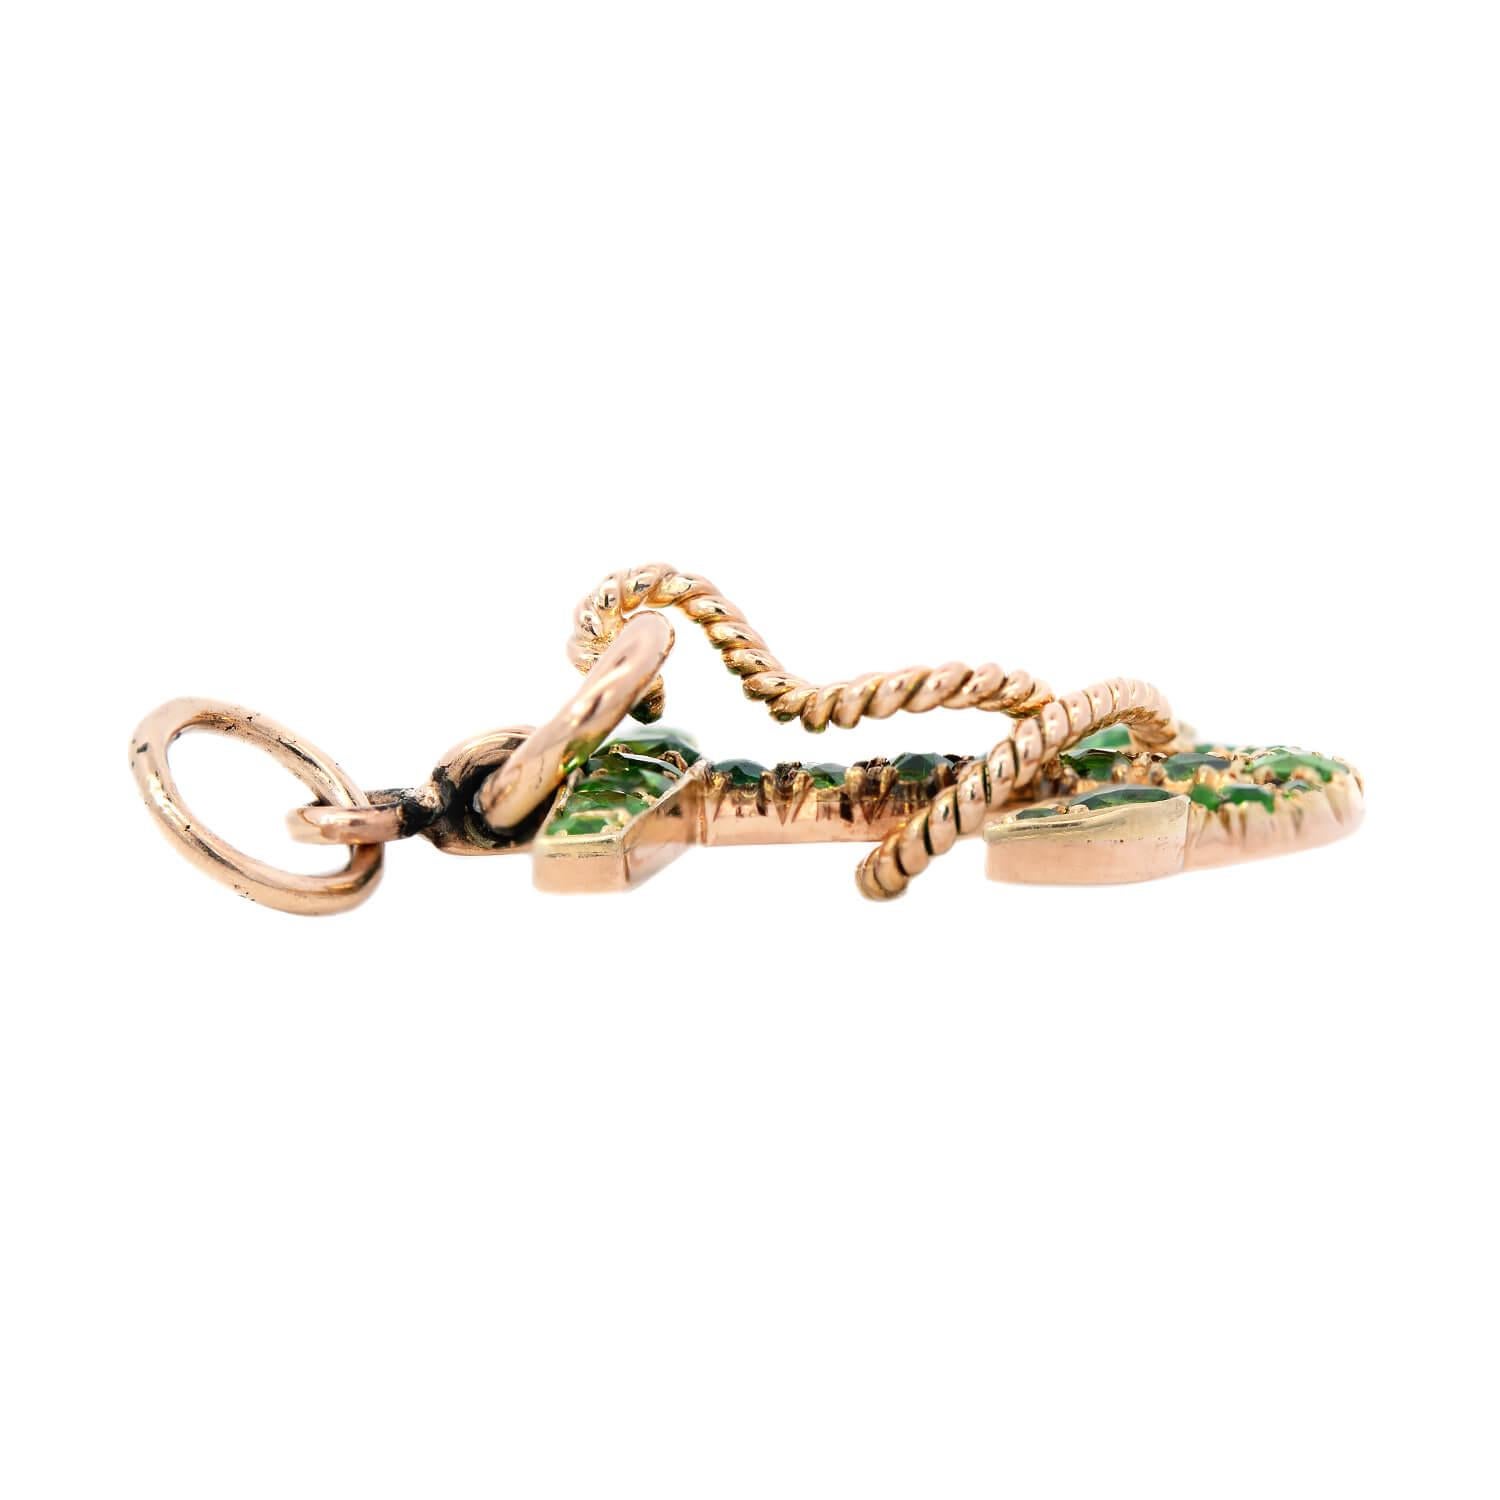 An incredible diamond anchor bar charm from the Victorian (ca1880) era! This beautiful brooch is crafted in 14kt gold, and has a stylish nautical design. Hanging from gold jump ring is a stunning gemstone anchor wrapped in a gold textured 